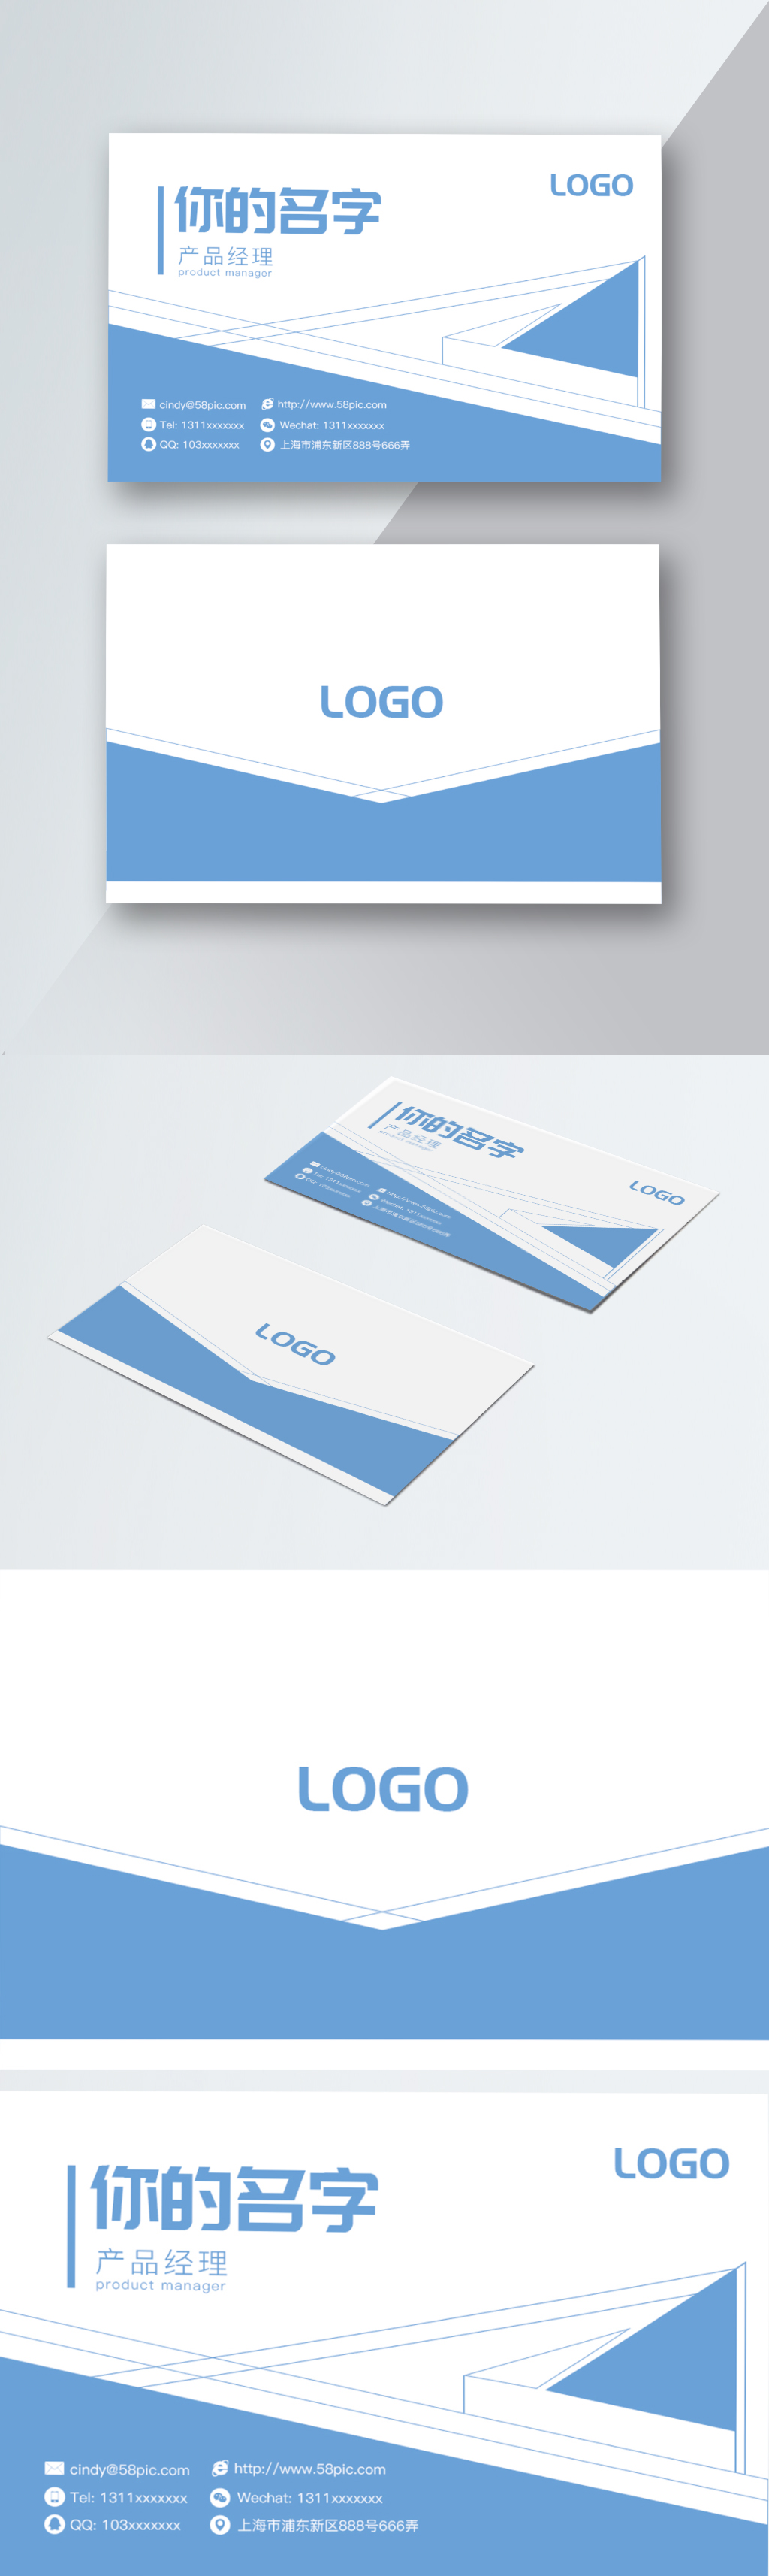 Download Simple Creative Yellow Geometric Business Card Template Image Picture Free Download 400139991 Lovepik Com PSD Mockup Templates